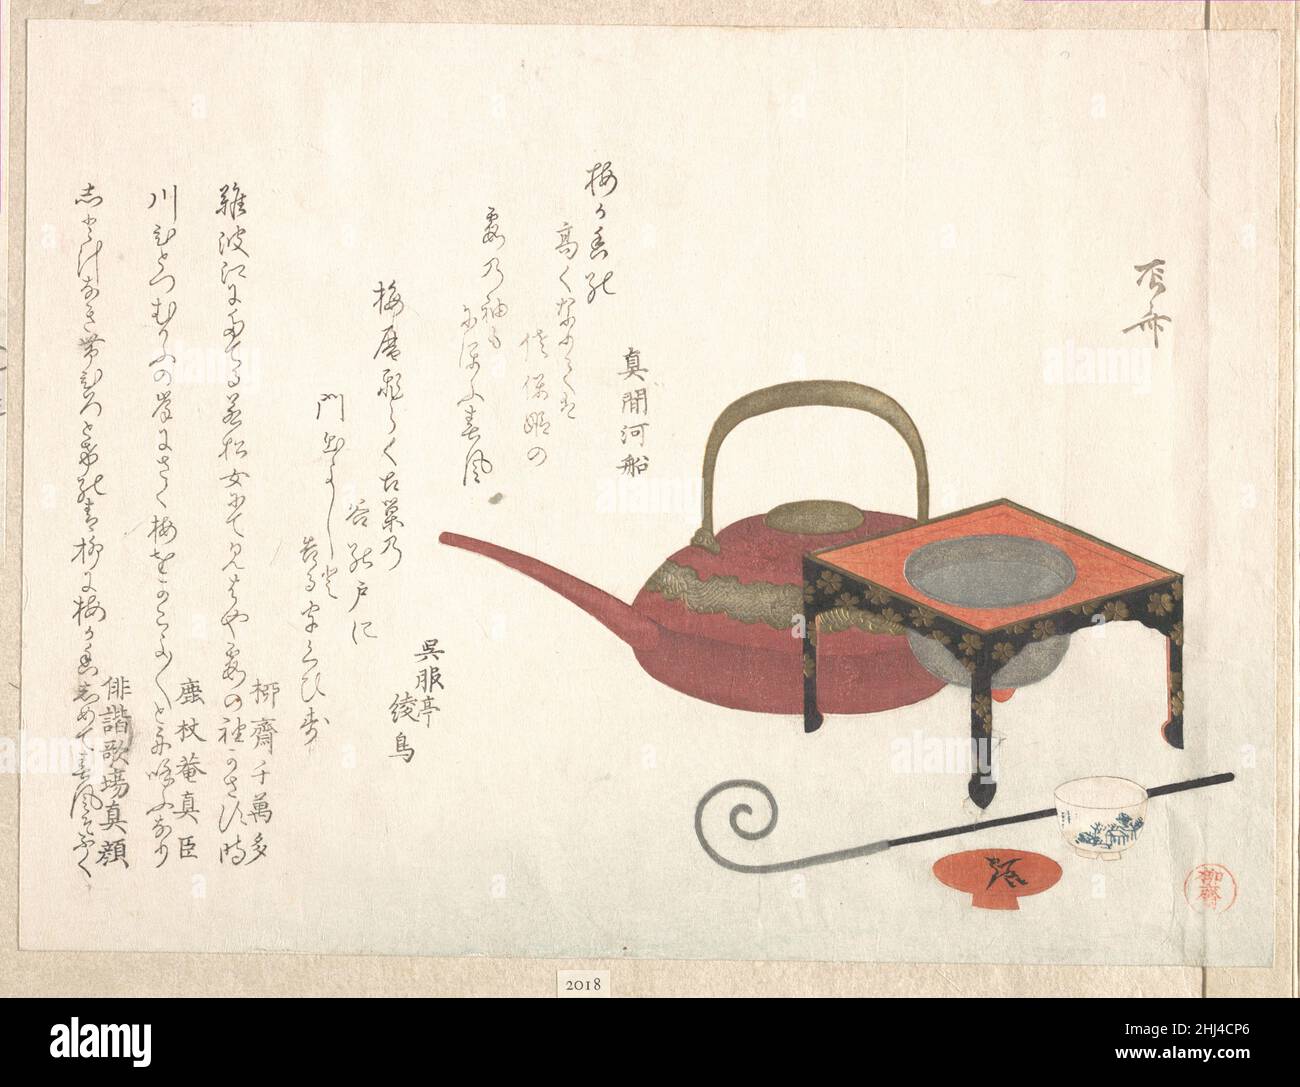 Wine-Set 19th century Ryūryūkyo Shinsai Japanese. Wine-Set  54767 Artist: Ryuryukyo Shinsai, Japanese, active ca. 1799?1823, Wine-Set, 19th century, Polychrome woodblock print (surimono); ink and color on paper, 8 5/8 x 11 1/4 in. (21.9 x 28.6 cm). The Metropolitan Museum of Art, New York. H. O. Havemeyer Collection, Bequest of Mrs. H. O. Havemeyer, 1929 (JP2018) Stock Photo